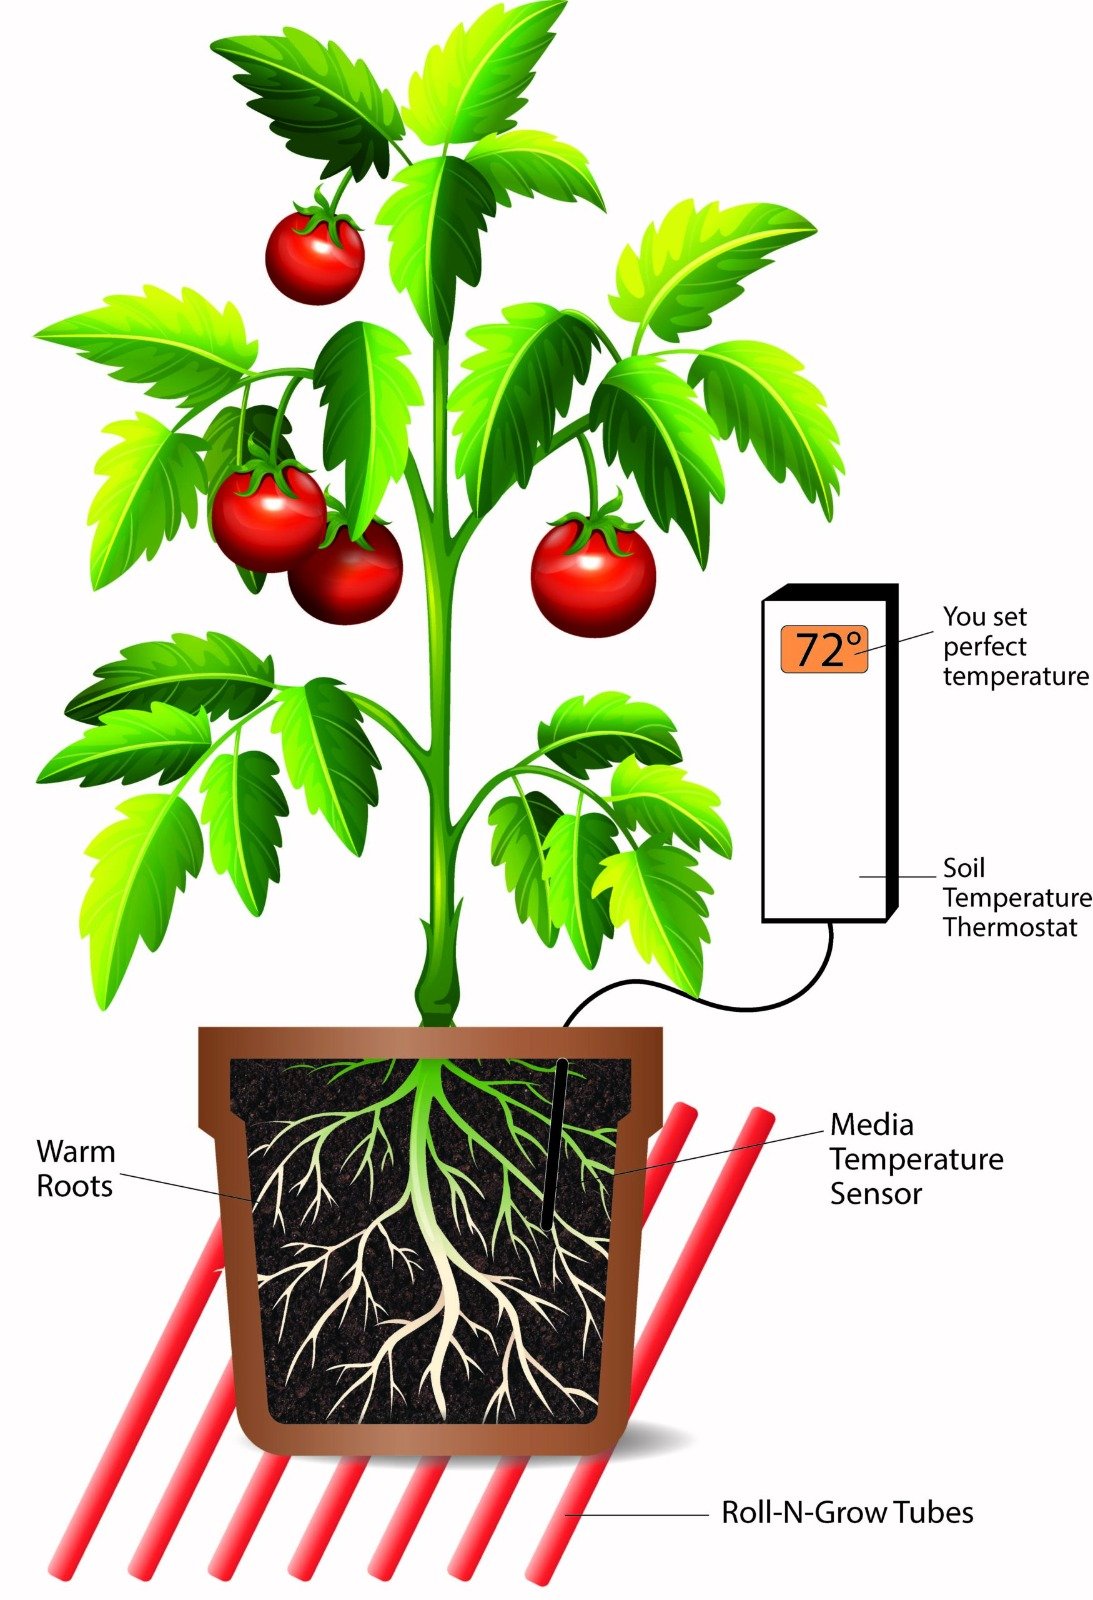 Illustration of tomato plant showing roots diagraming how to use the Roll and grow mat. Pot placed on the the Roll'N Grow Tubes to warm roots to the perfect temperature of users choice, measured using a soil temperature thermostat with the sensor placed in the soil